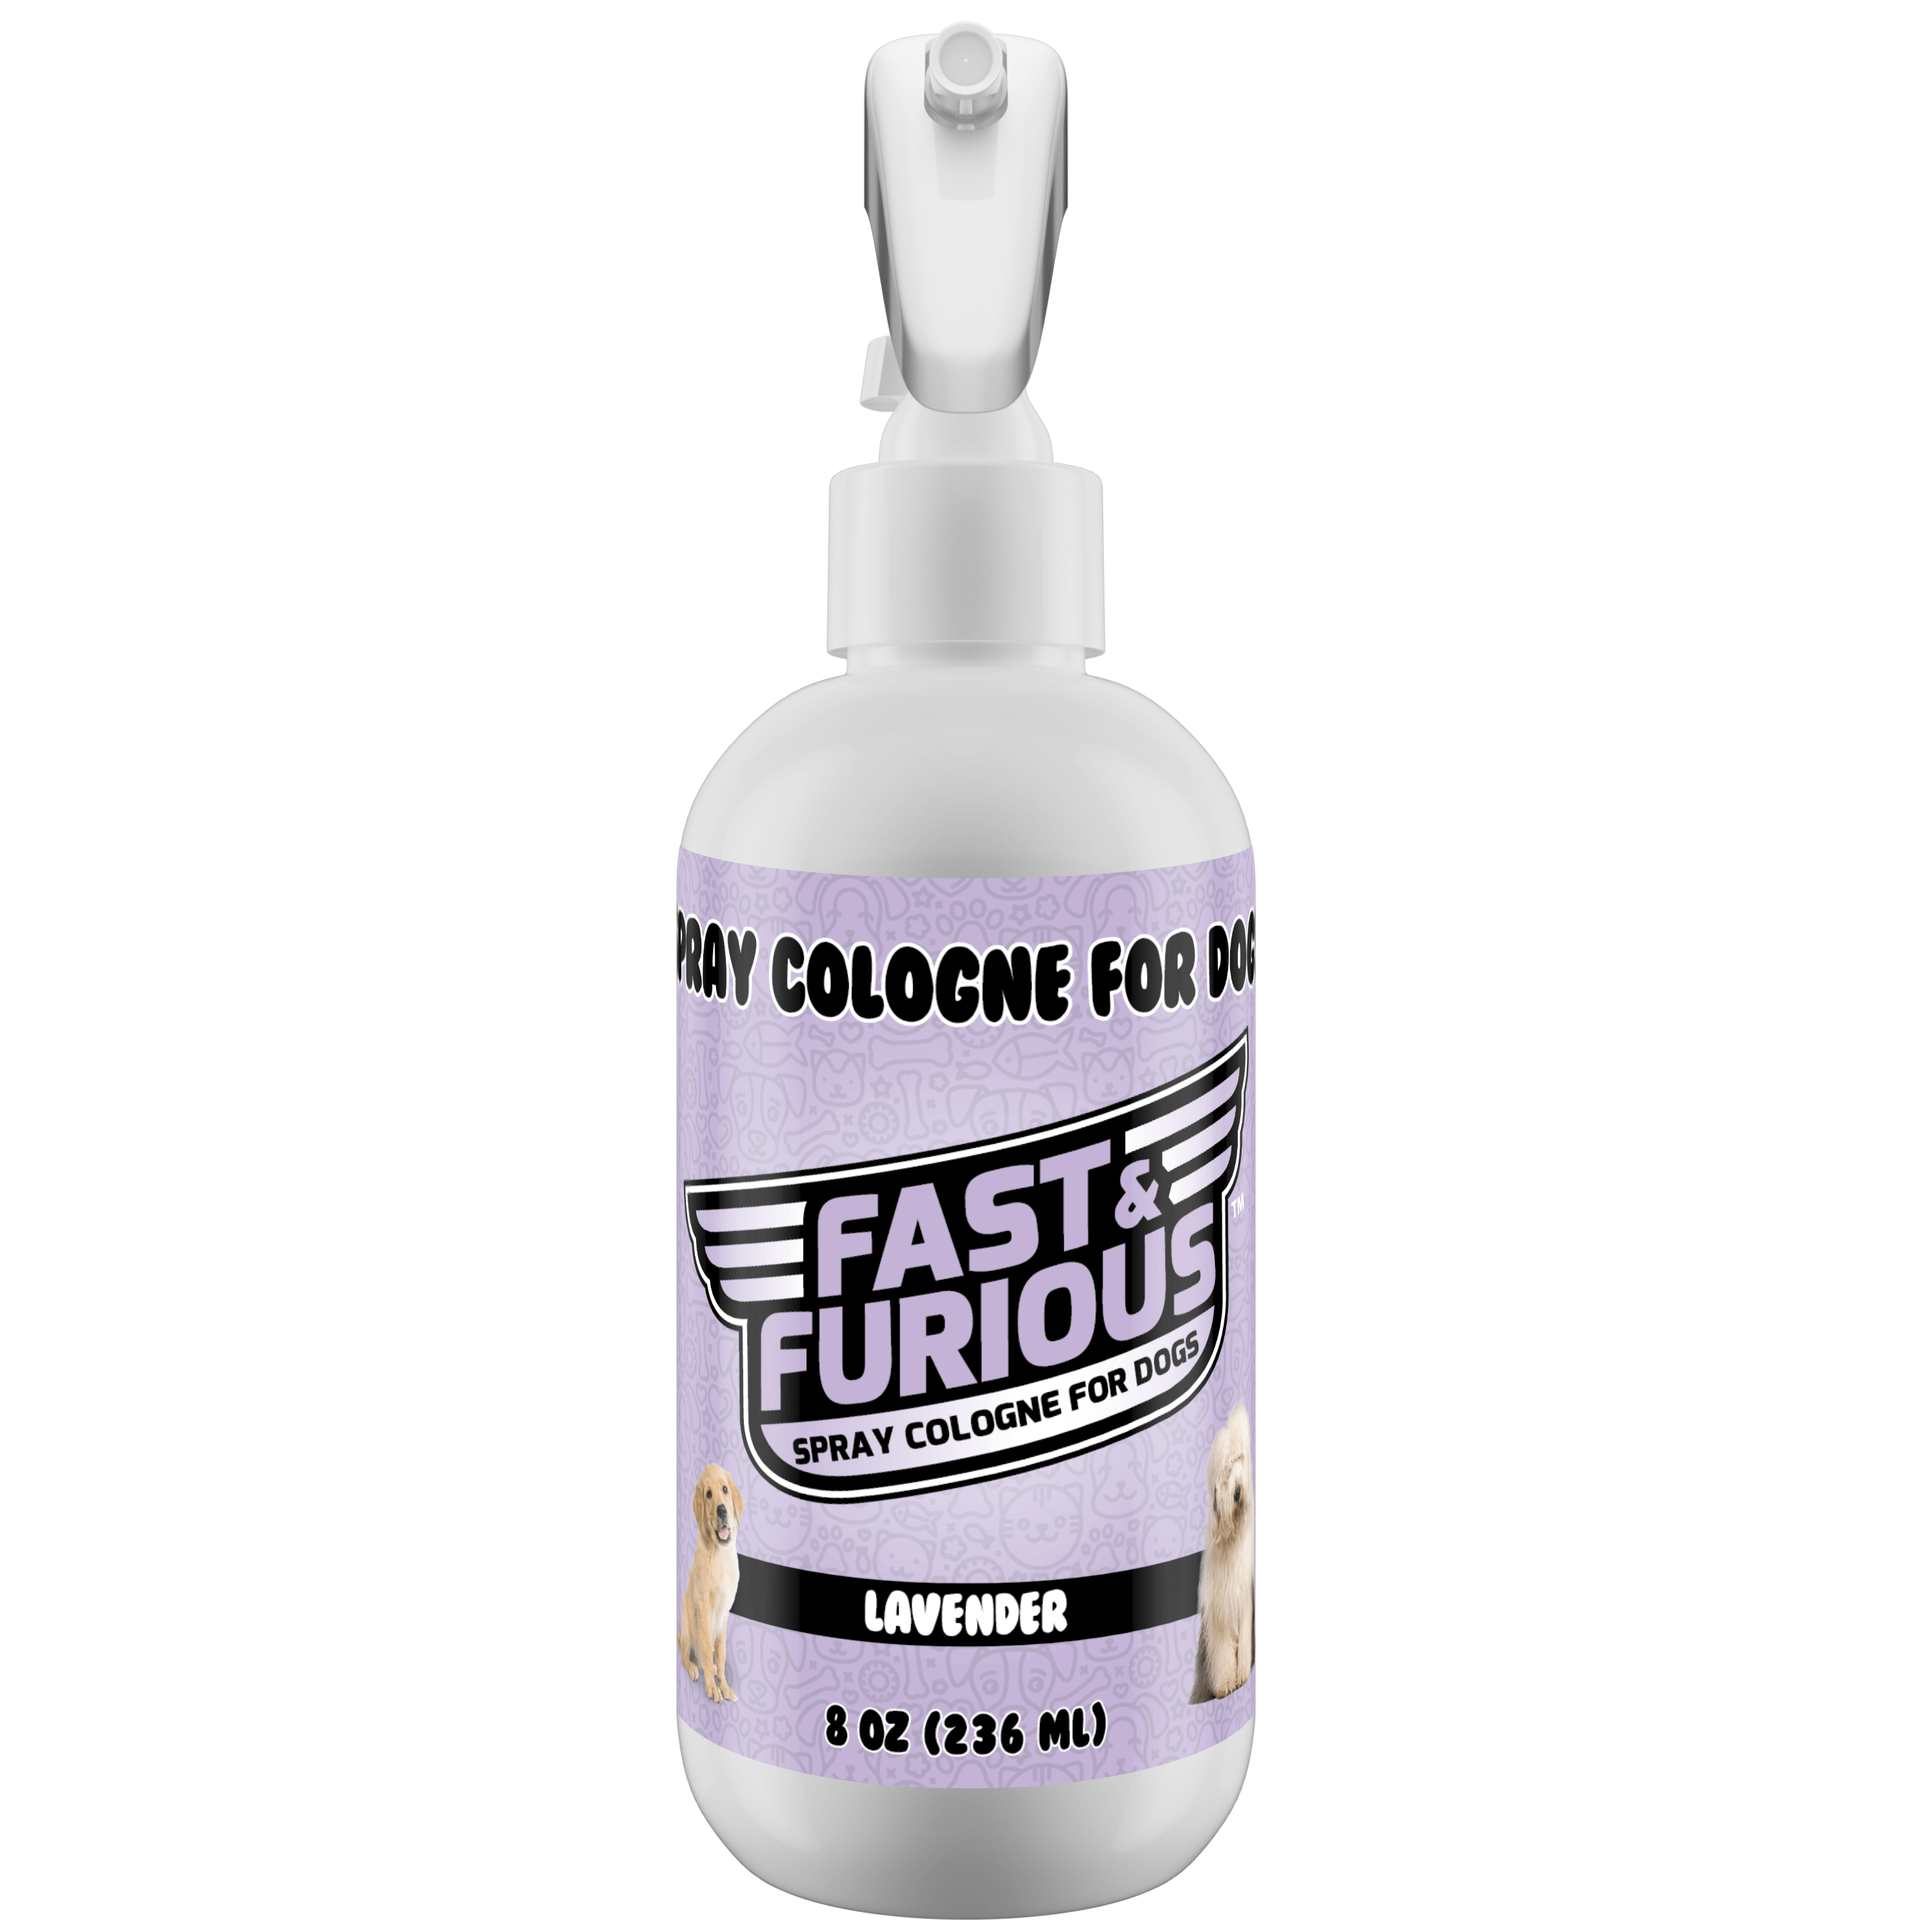 Fast & Furious Spray Cologne For Dogs